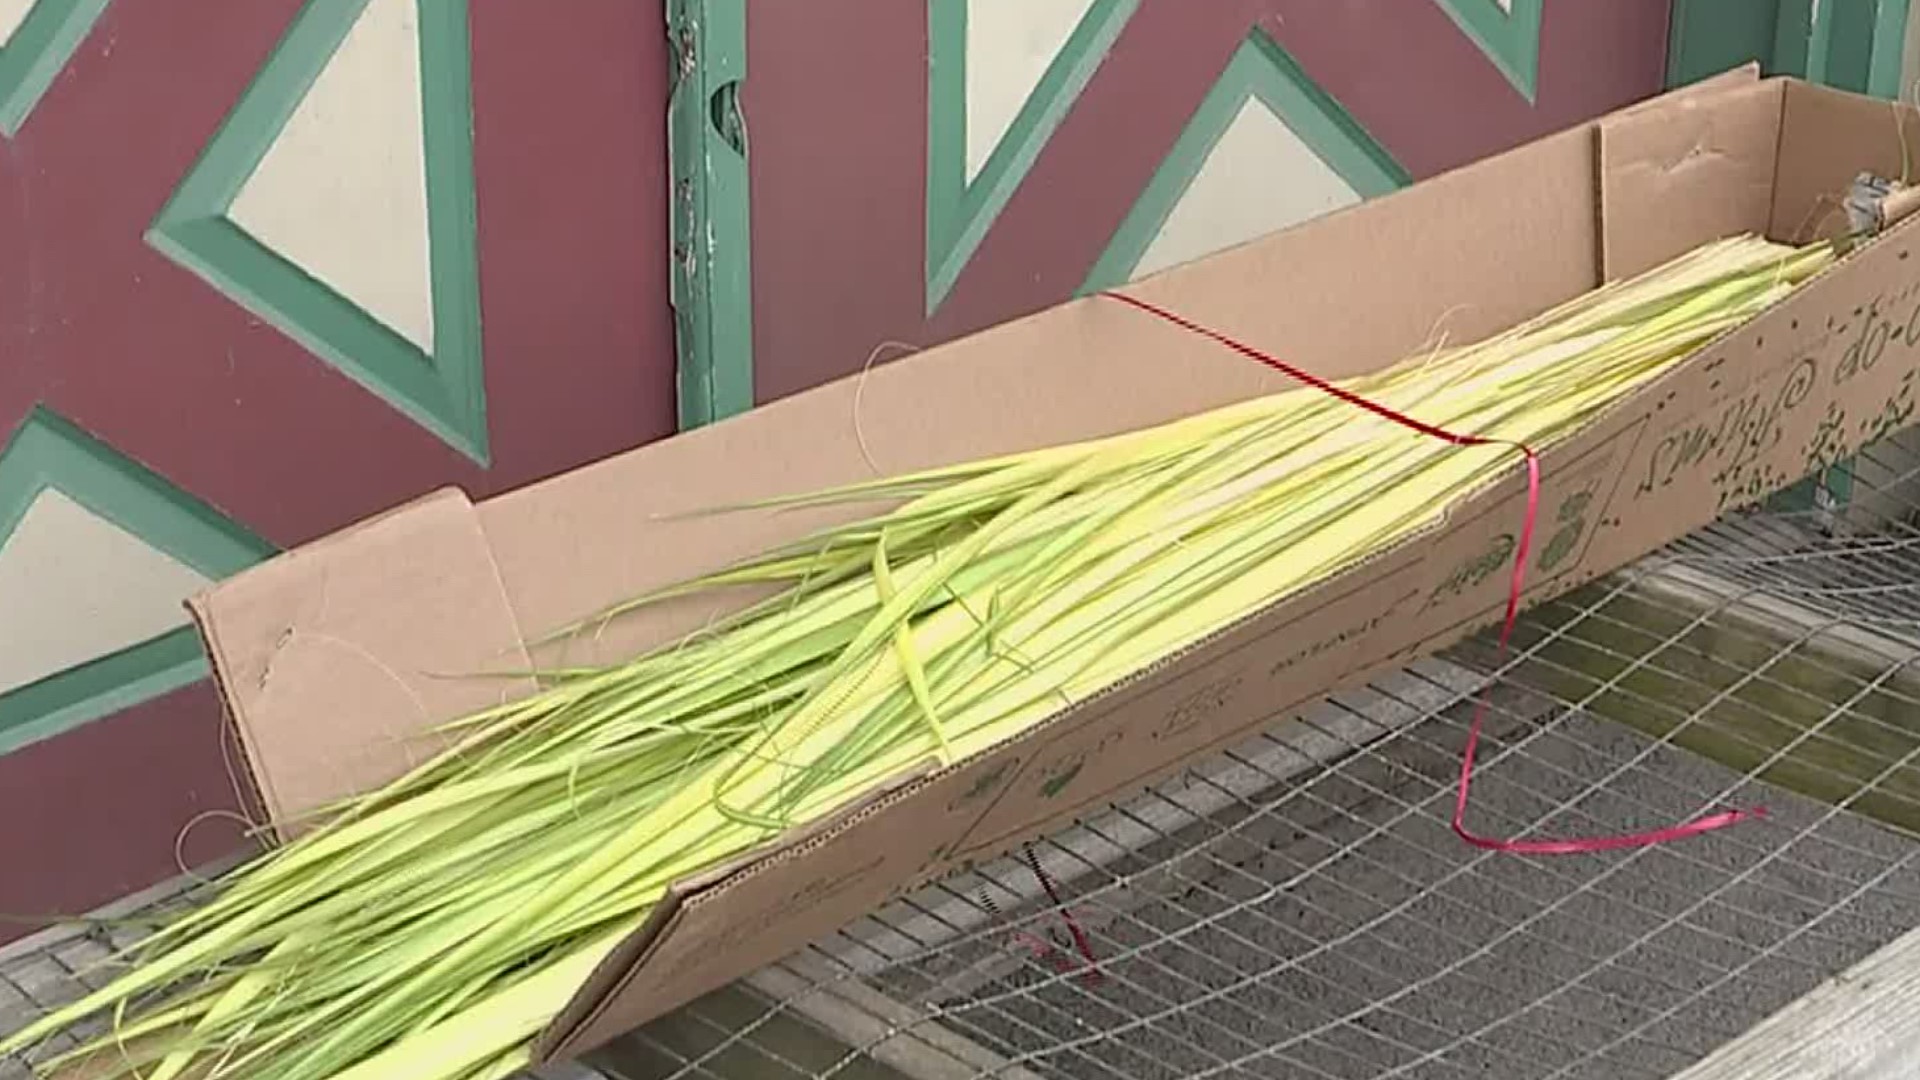 Florist giving out free palms for Palm Sunday